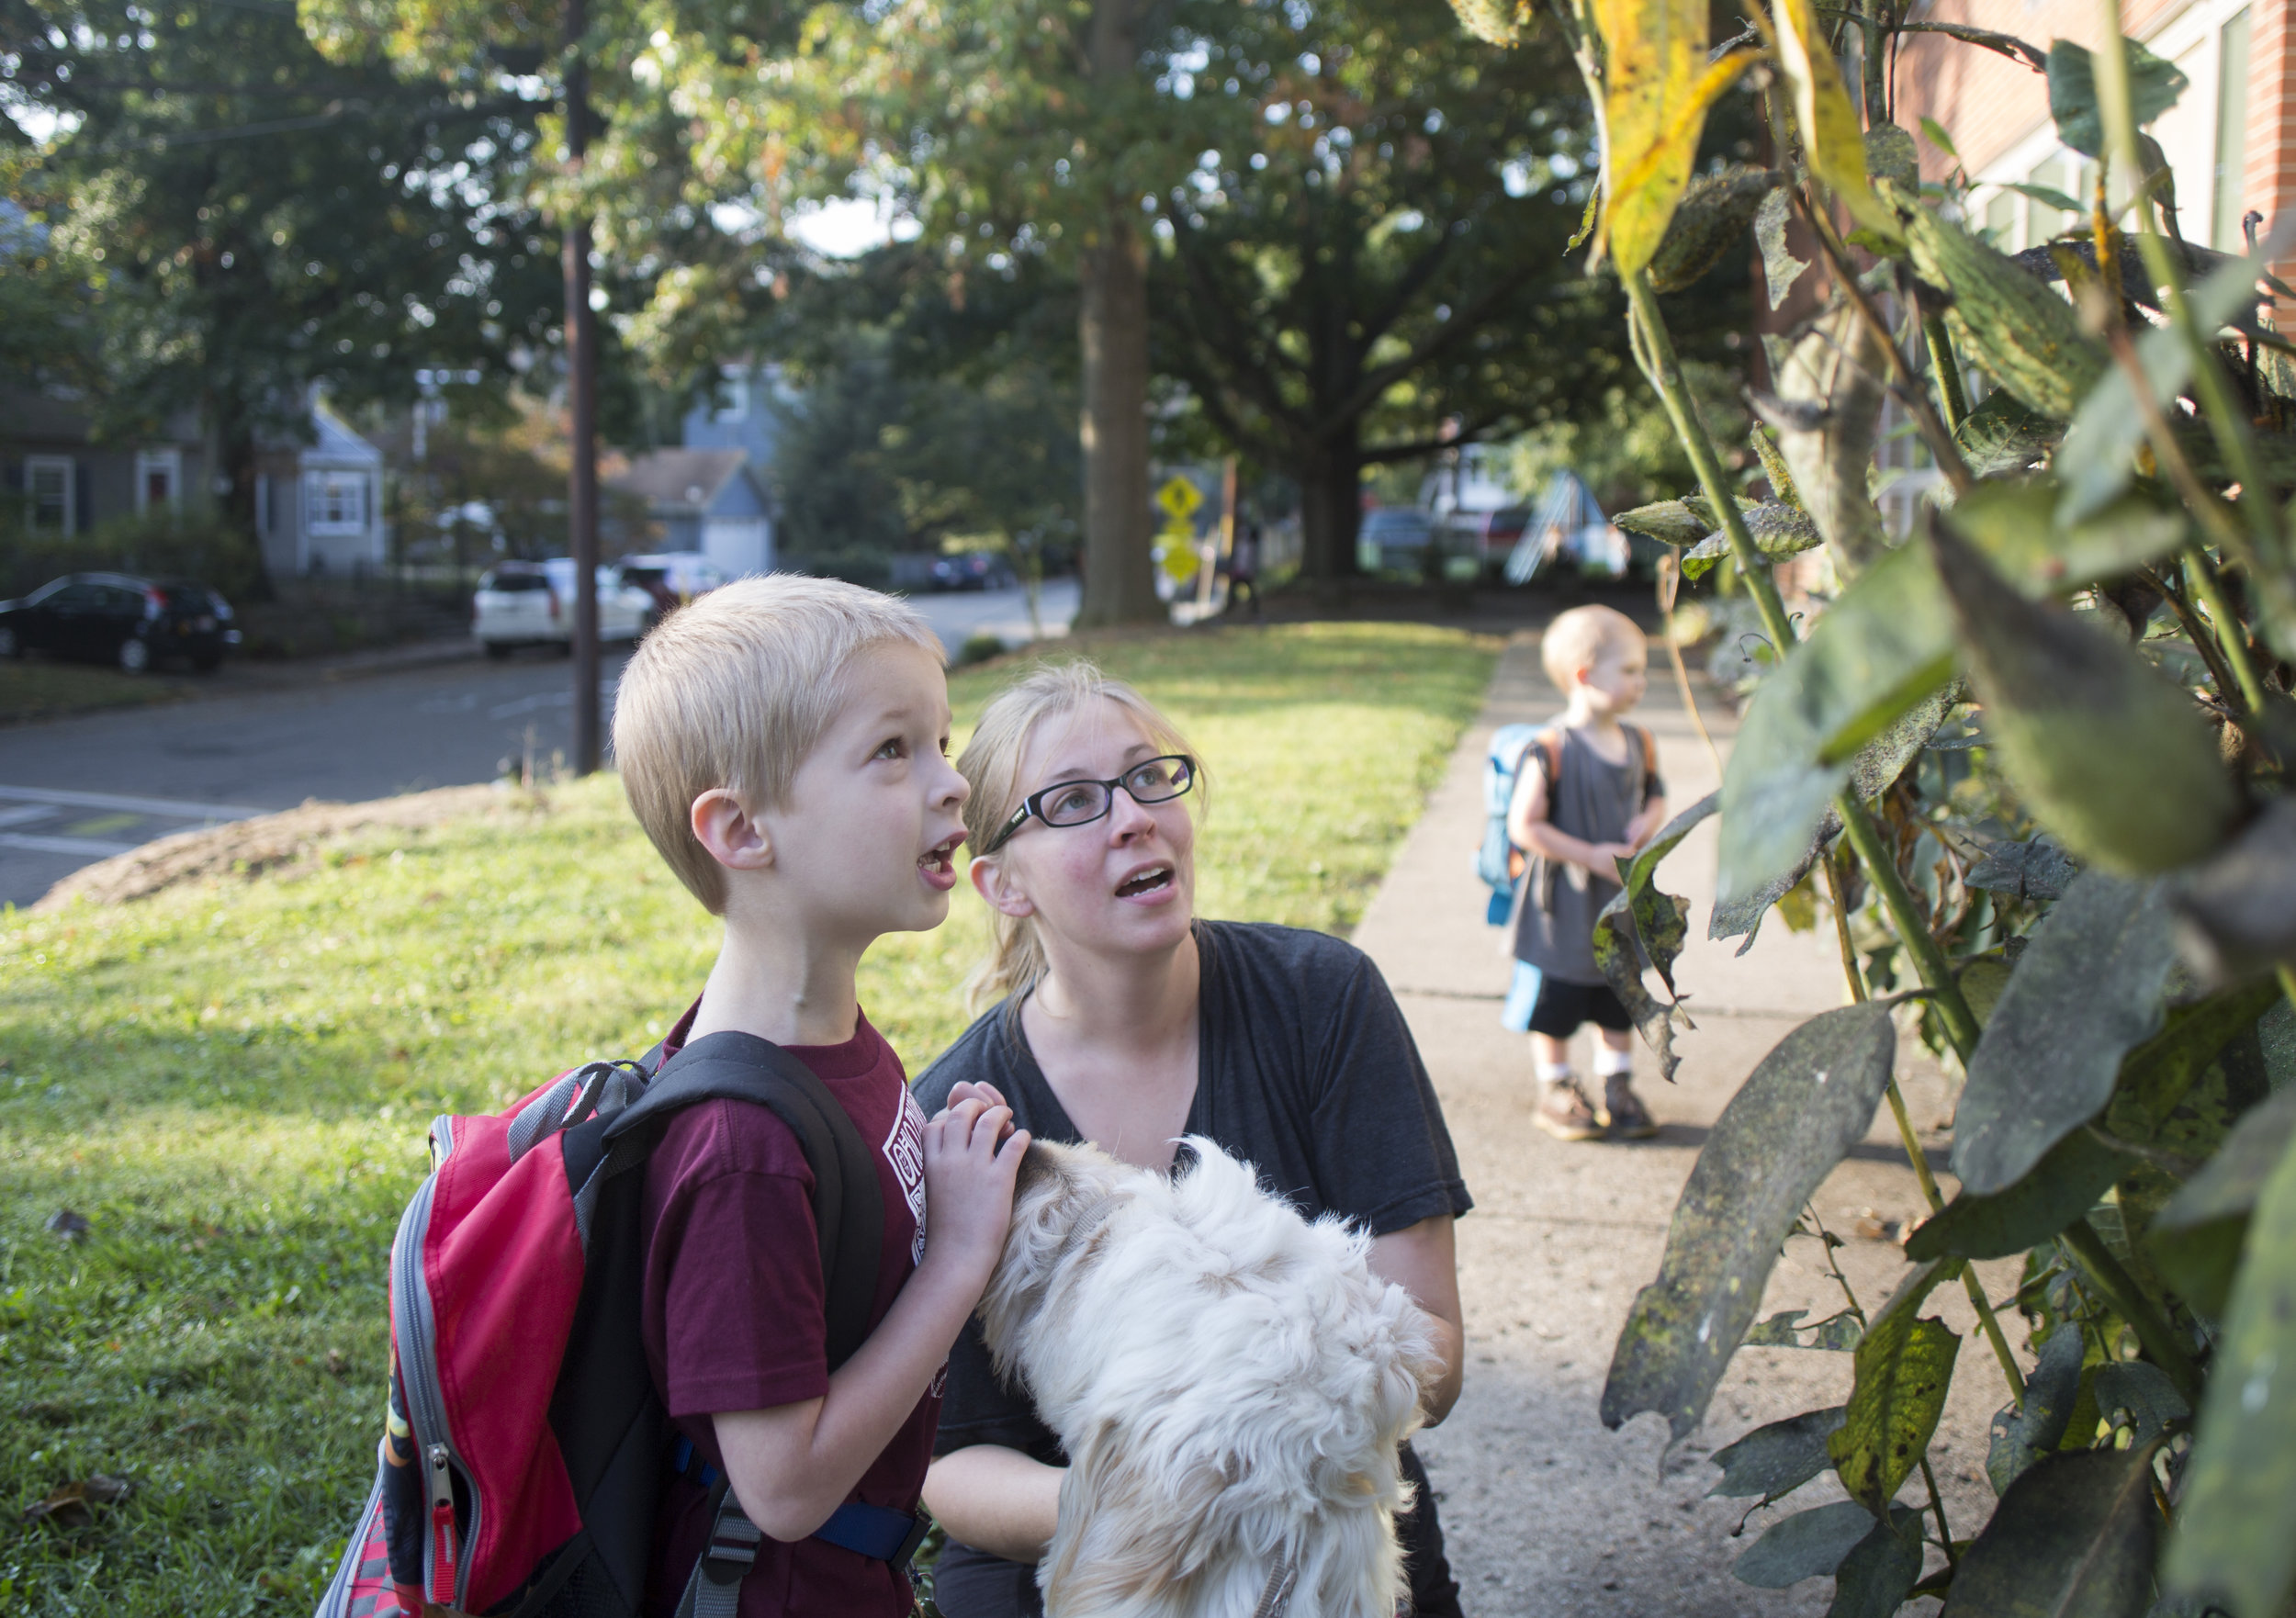  Josiah and his mom Rachel look for caterpillars on a bush in front of  East Elementary School in Athens, Ohio while Josiah touches Spad's snout and his brother Judah looks at the caterpillars separately. Rachel said Josiah has been more engaged with